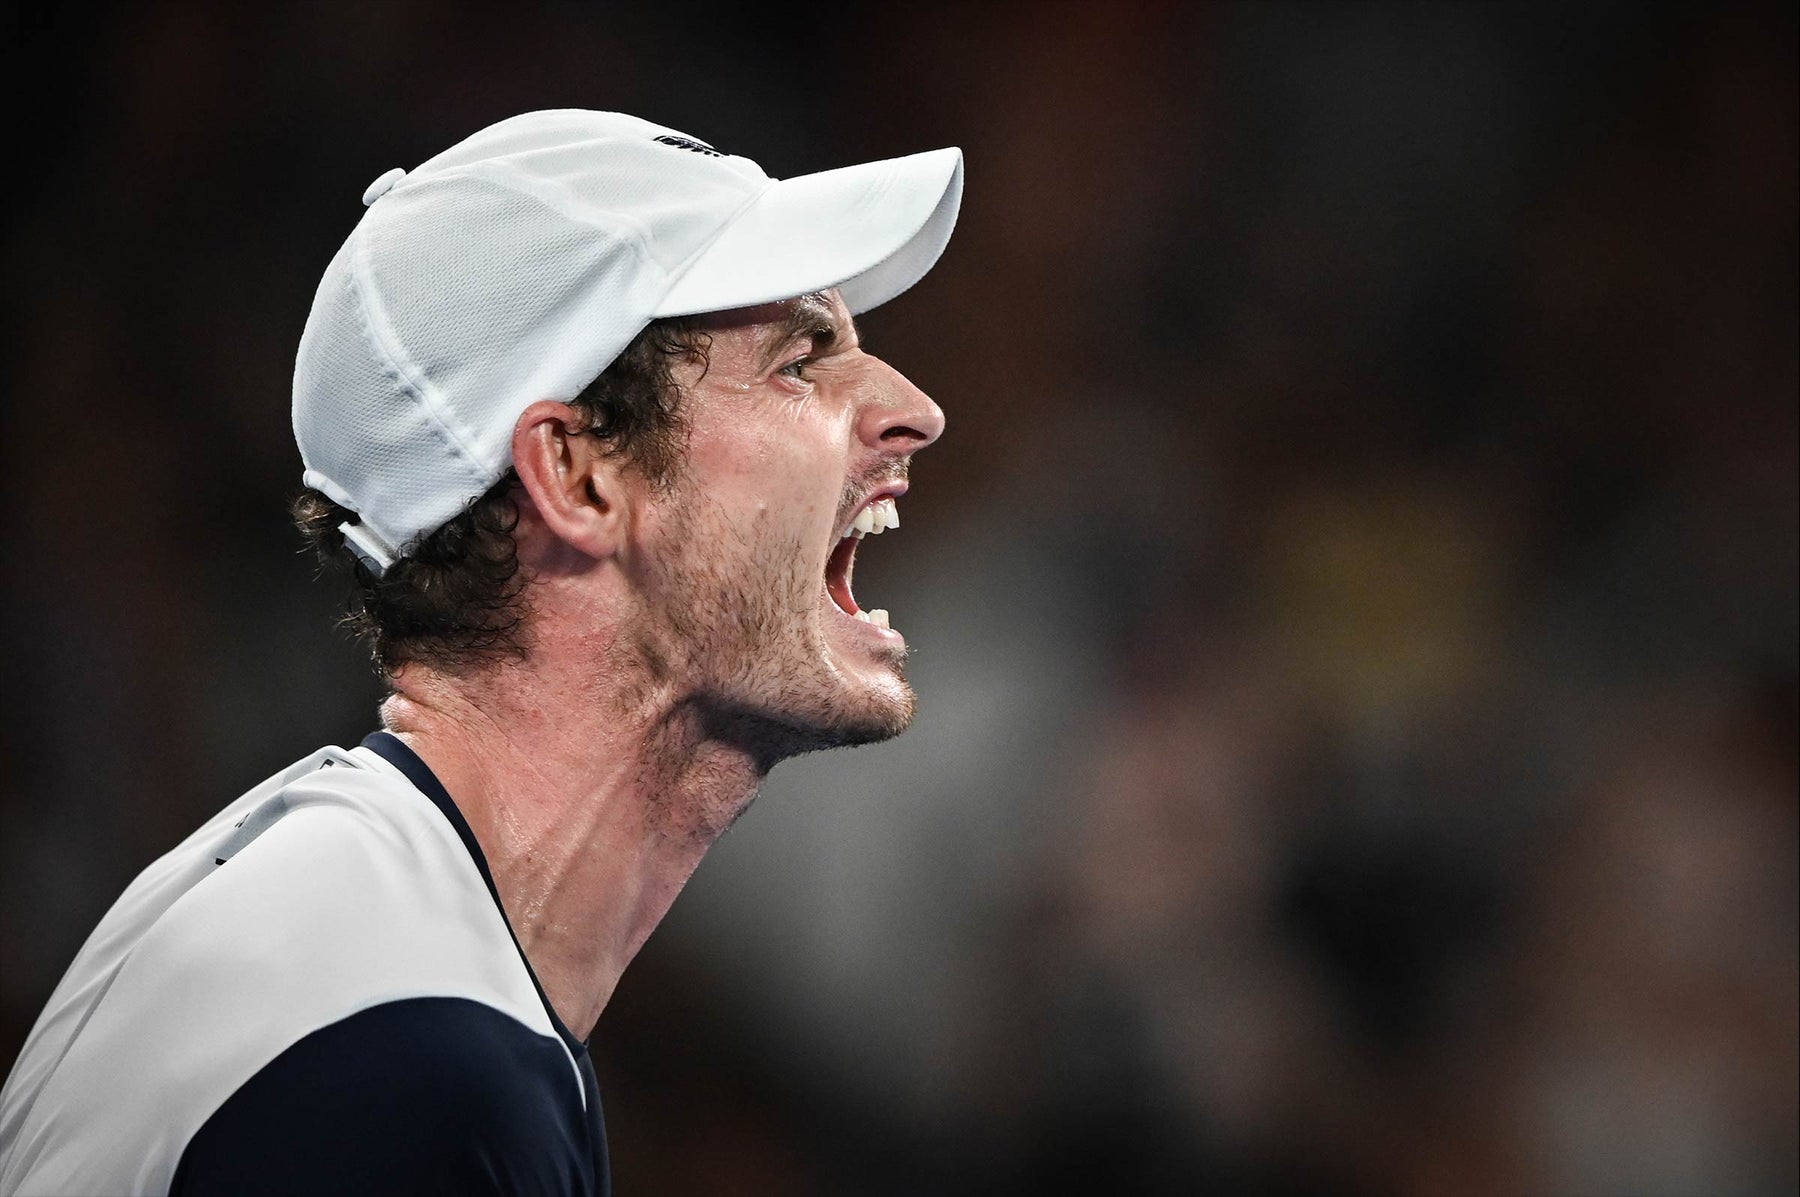 Welcome to the Functional Tennis Error page with this great picture of Andy Murray